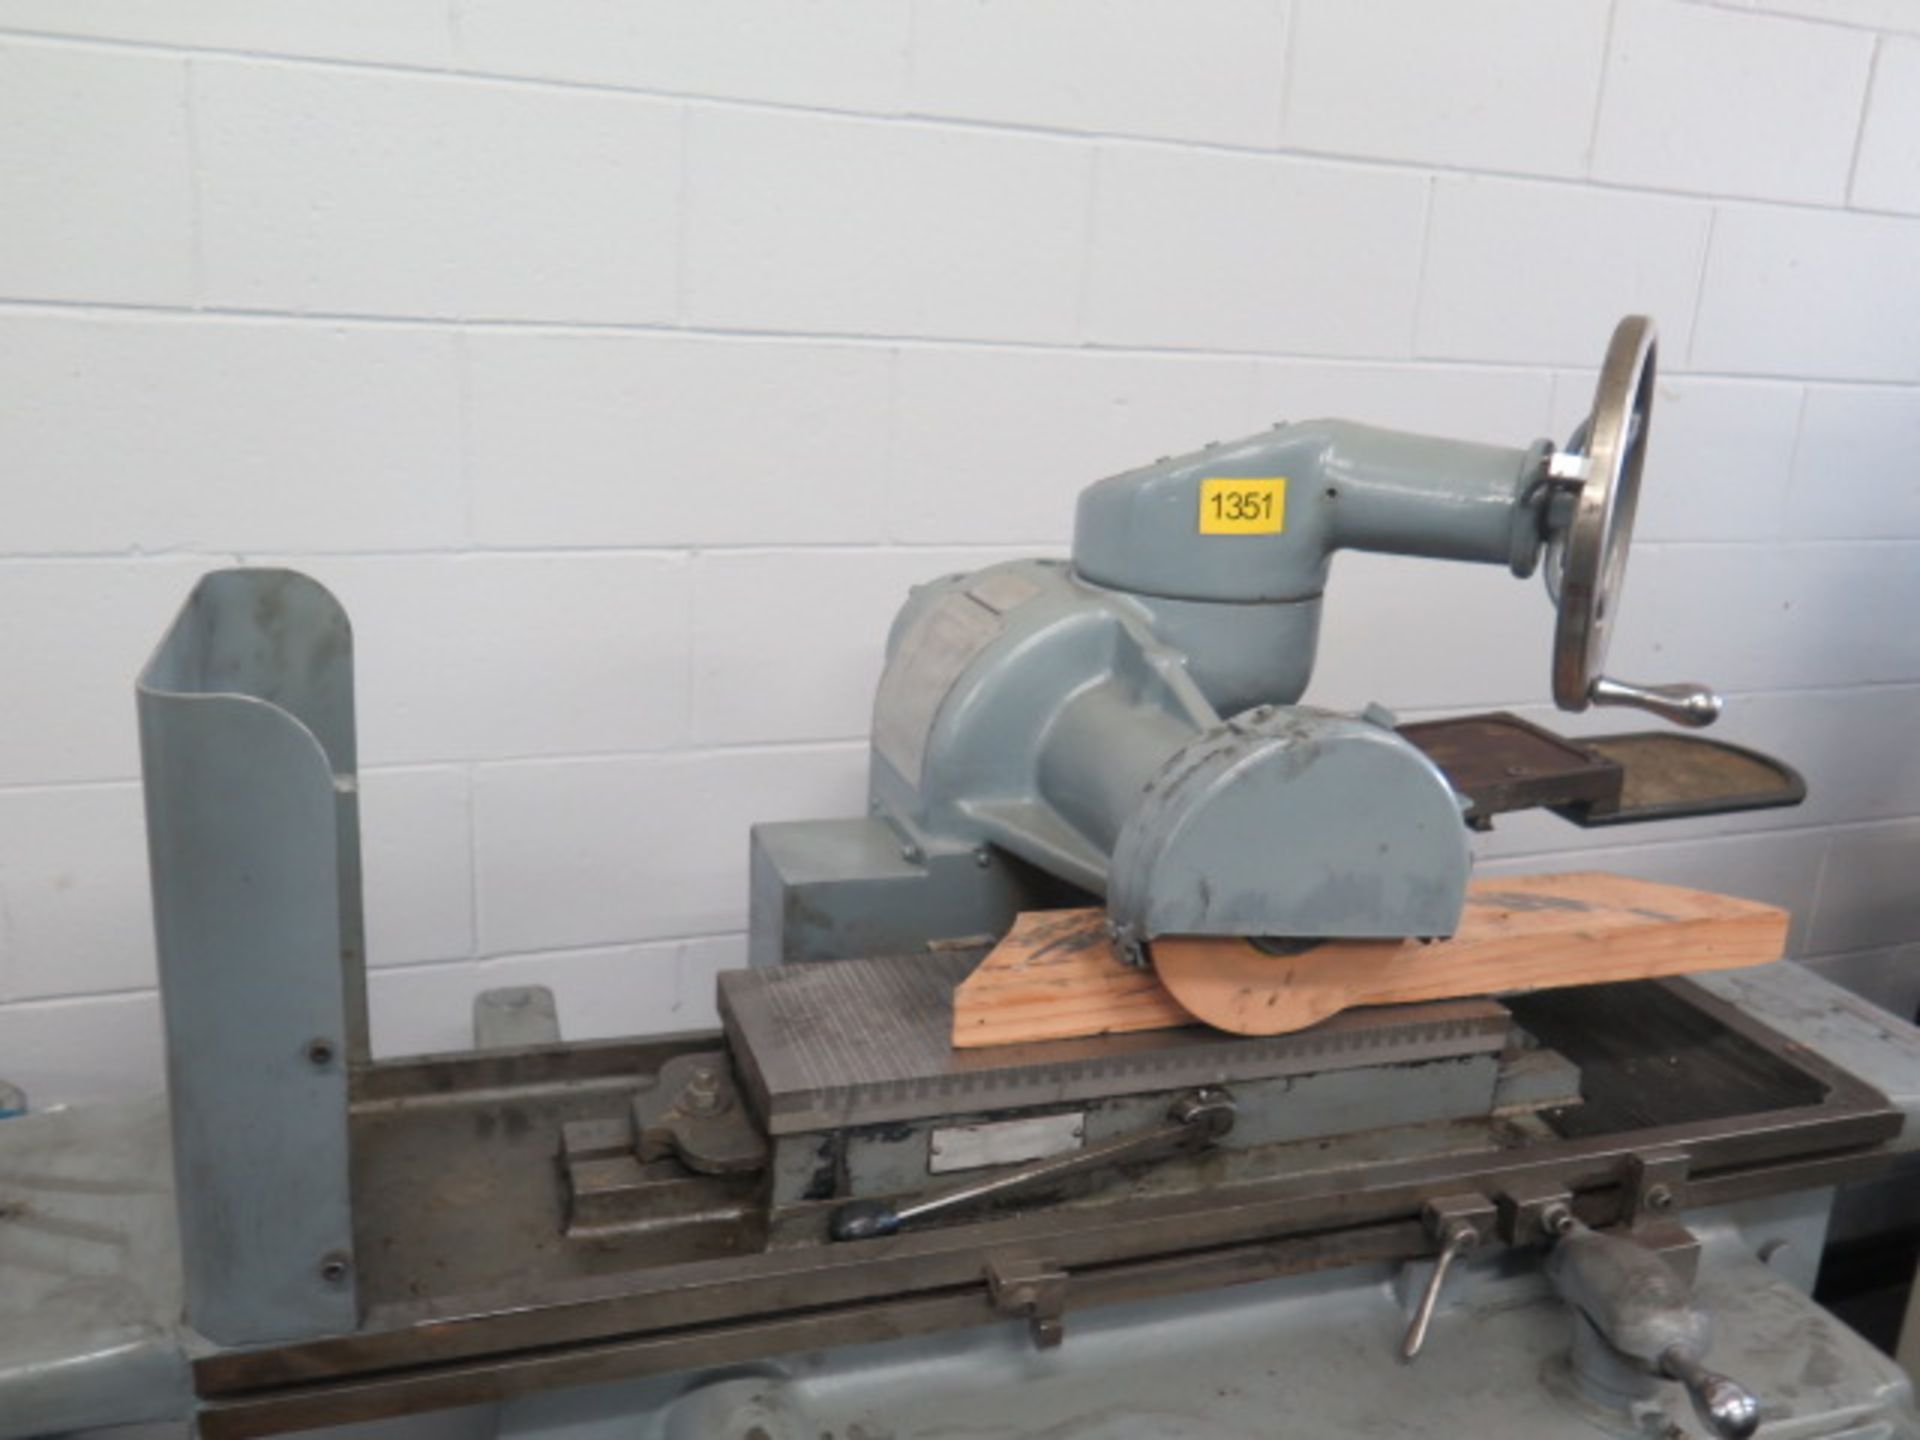 Norton 6” x 18” Automatic Surface Grinder s/n H6250 w/ Magnetic Chuck (SOLD AS-IS - NO WARRANTY) - Image 2 of 8